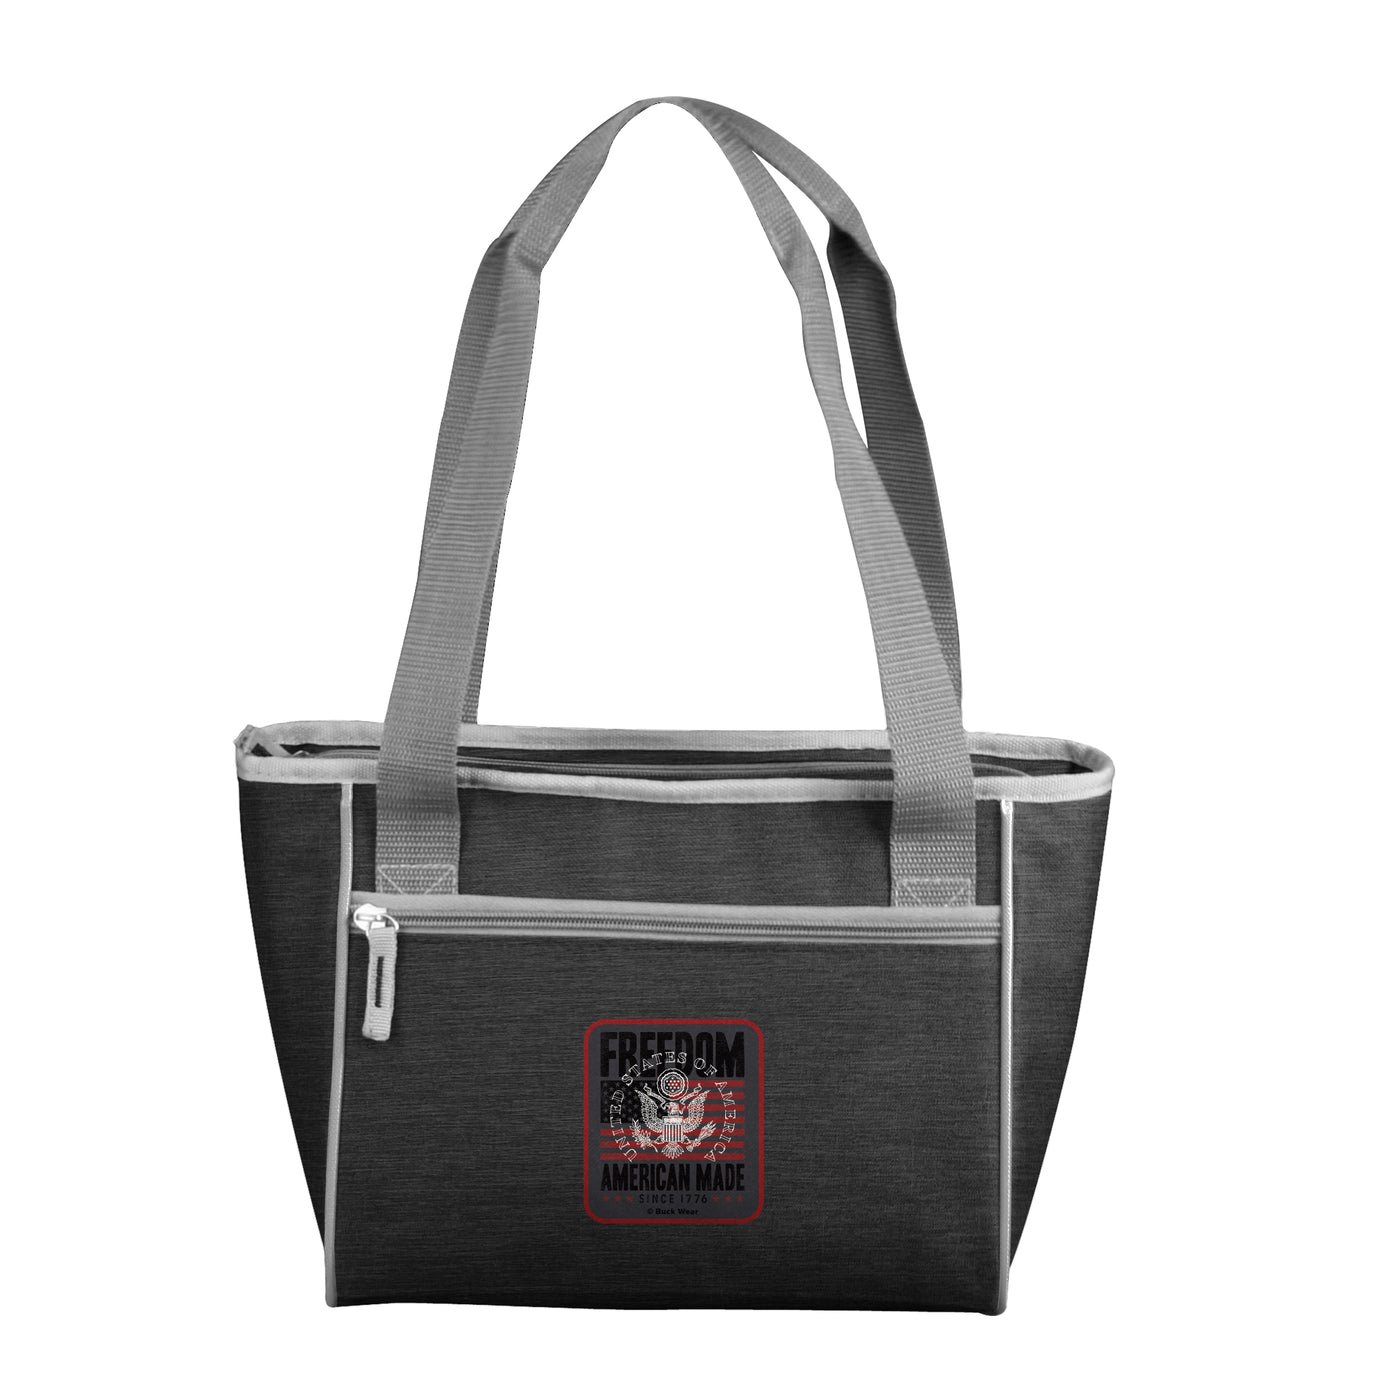 Freedom "American Made" 16 Can Cooler Tote